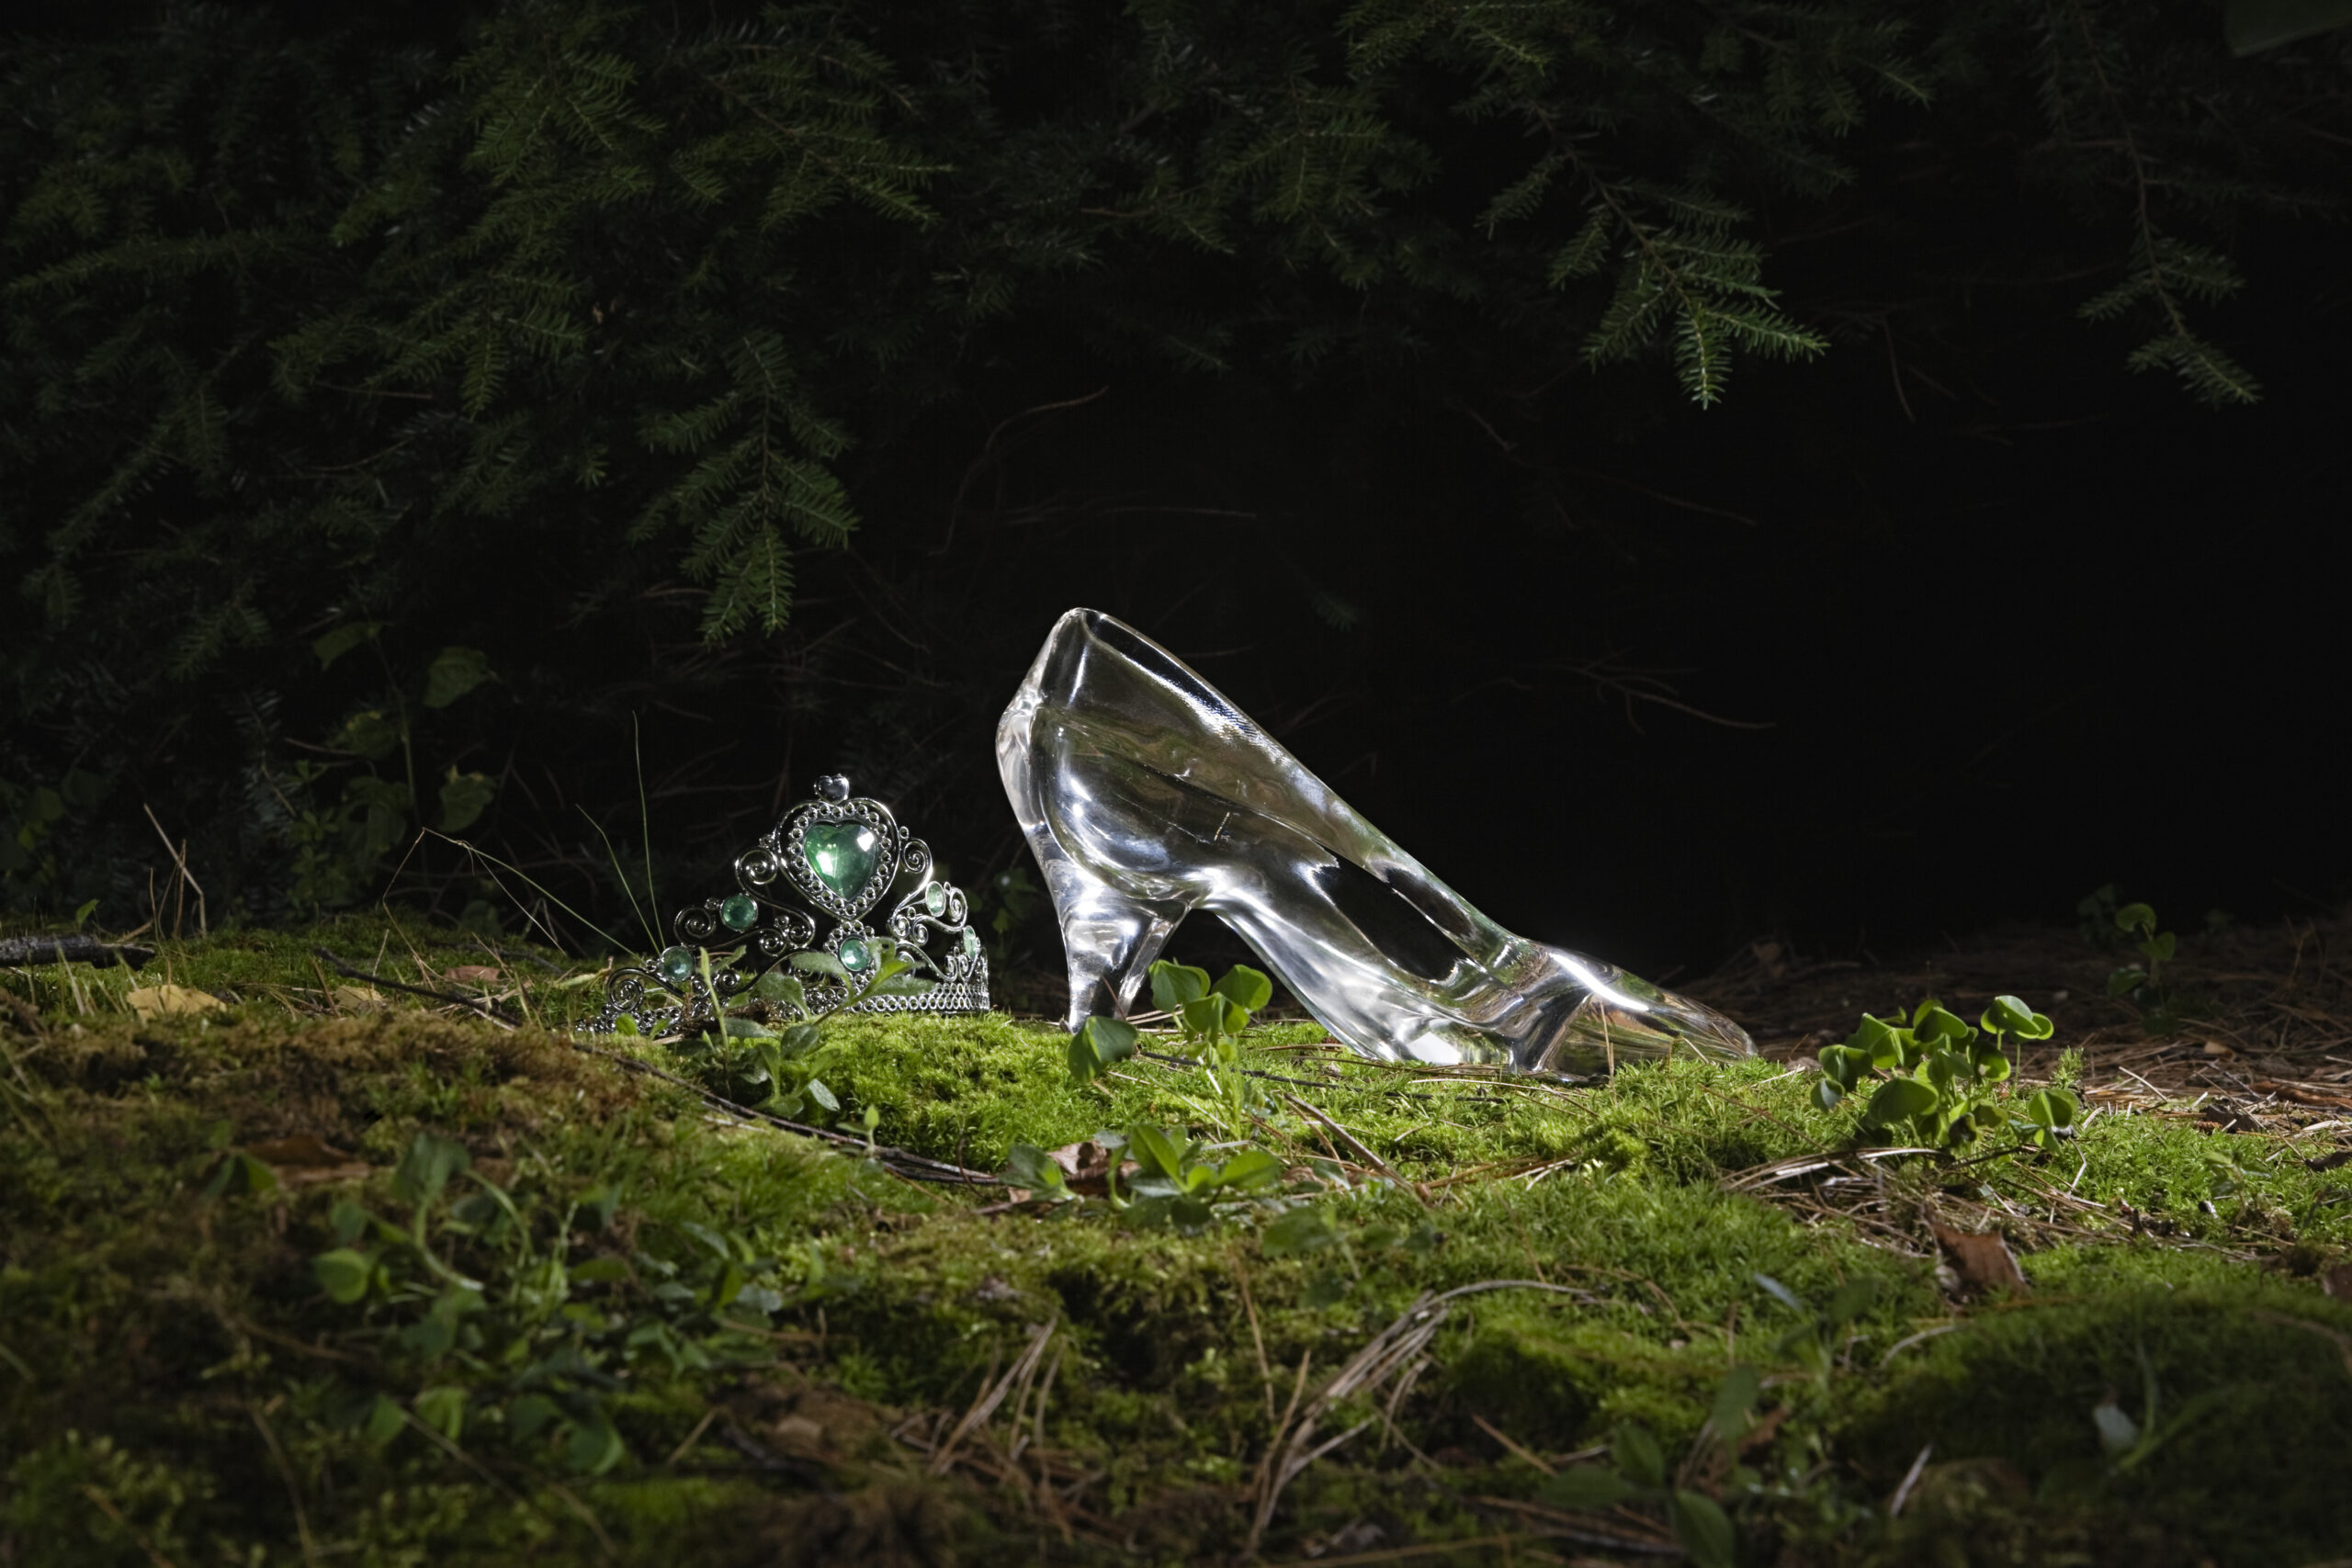 a Tiara and glass slipper with the forest in the background.